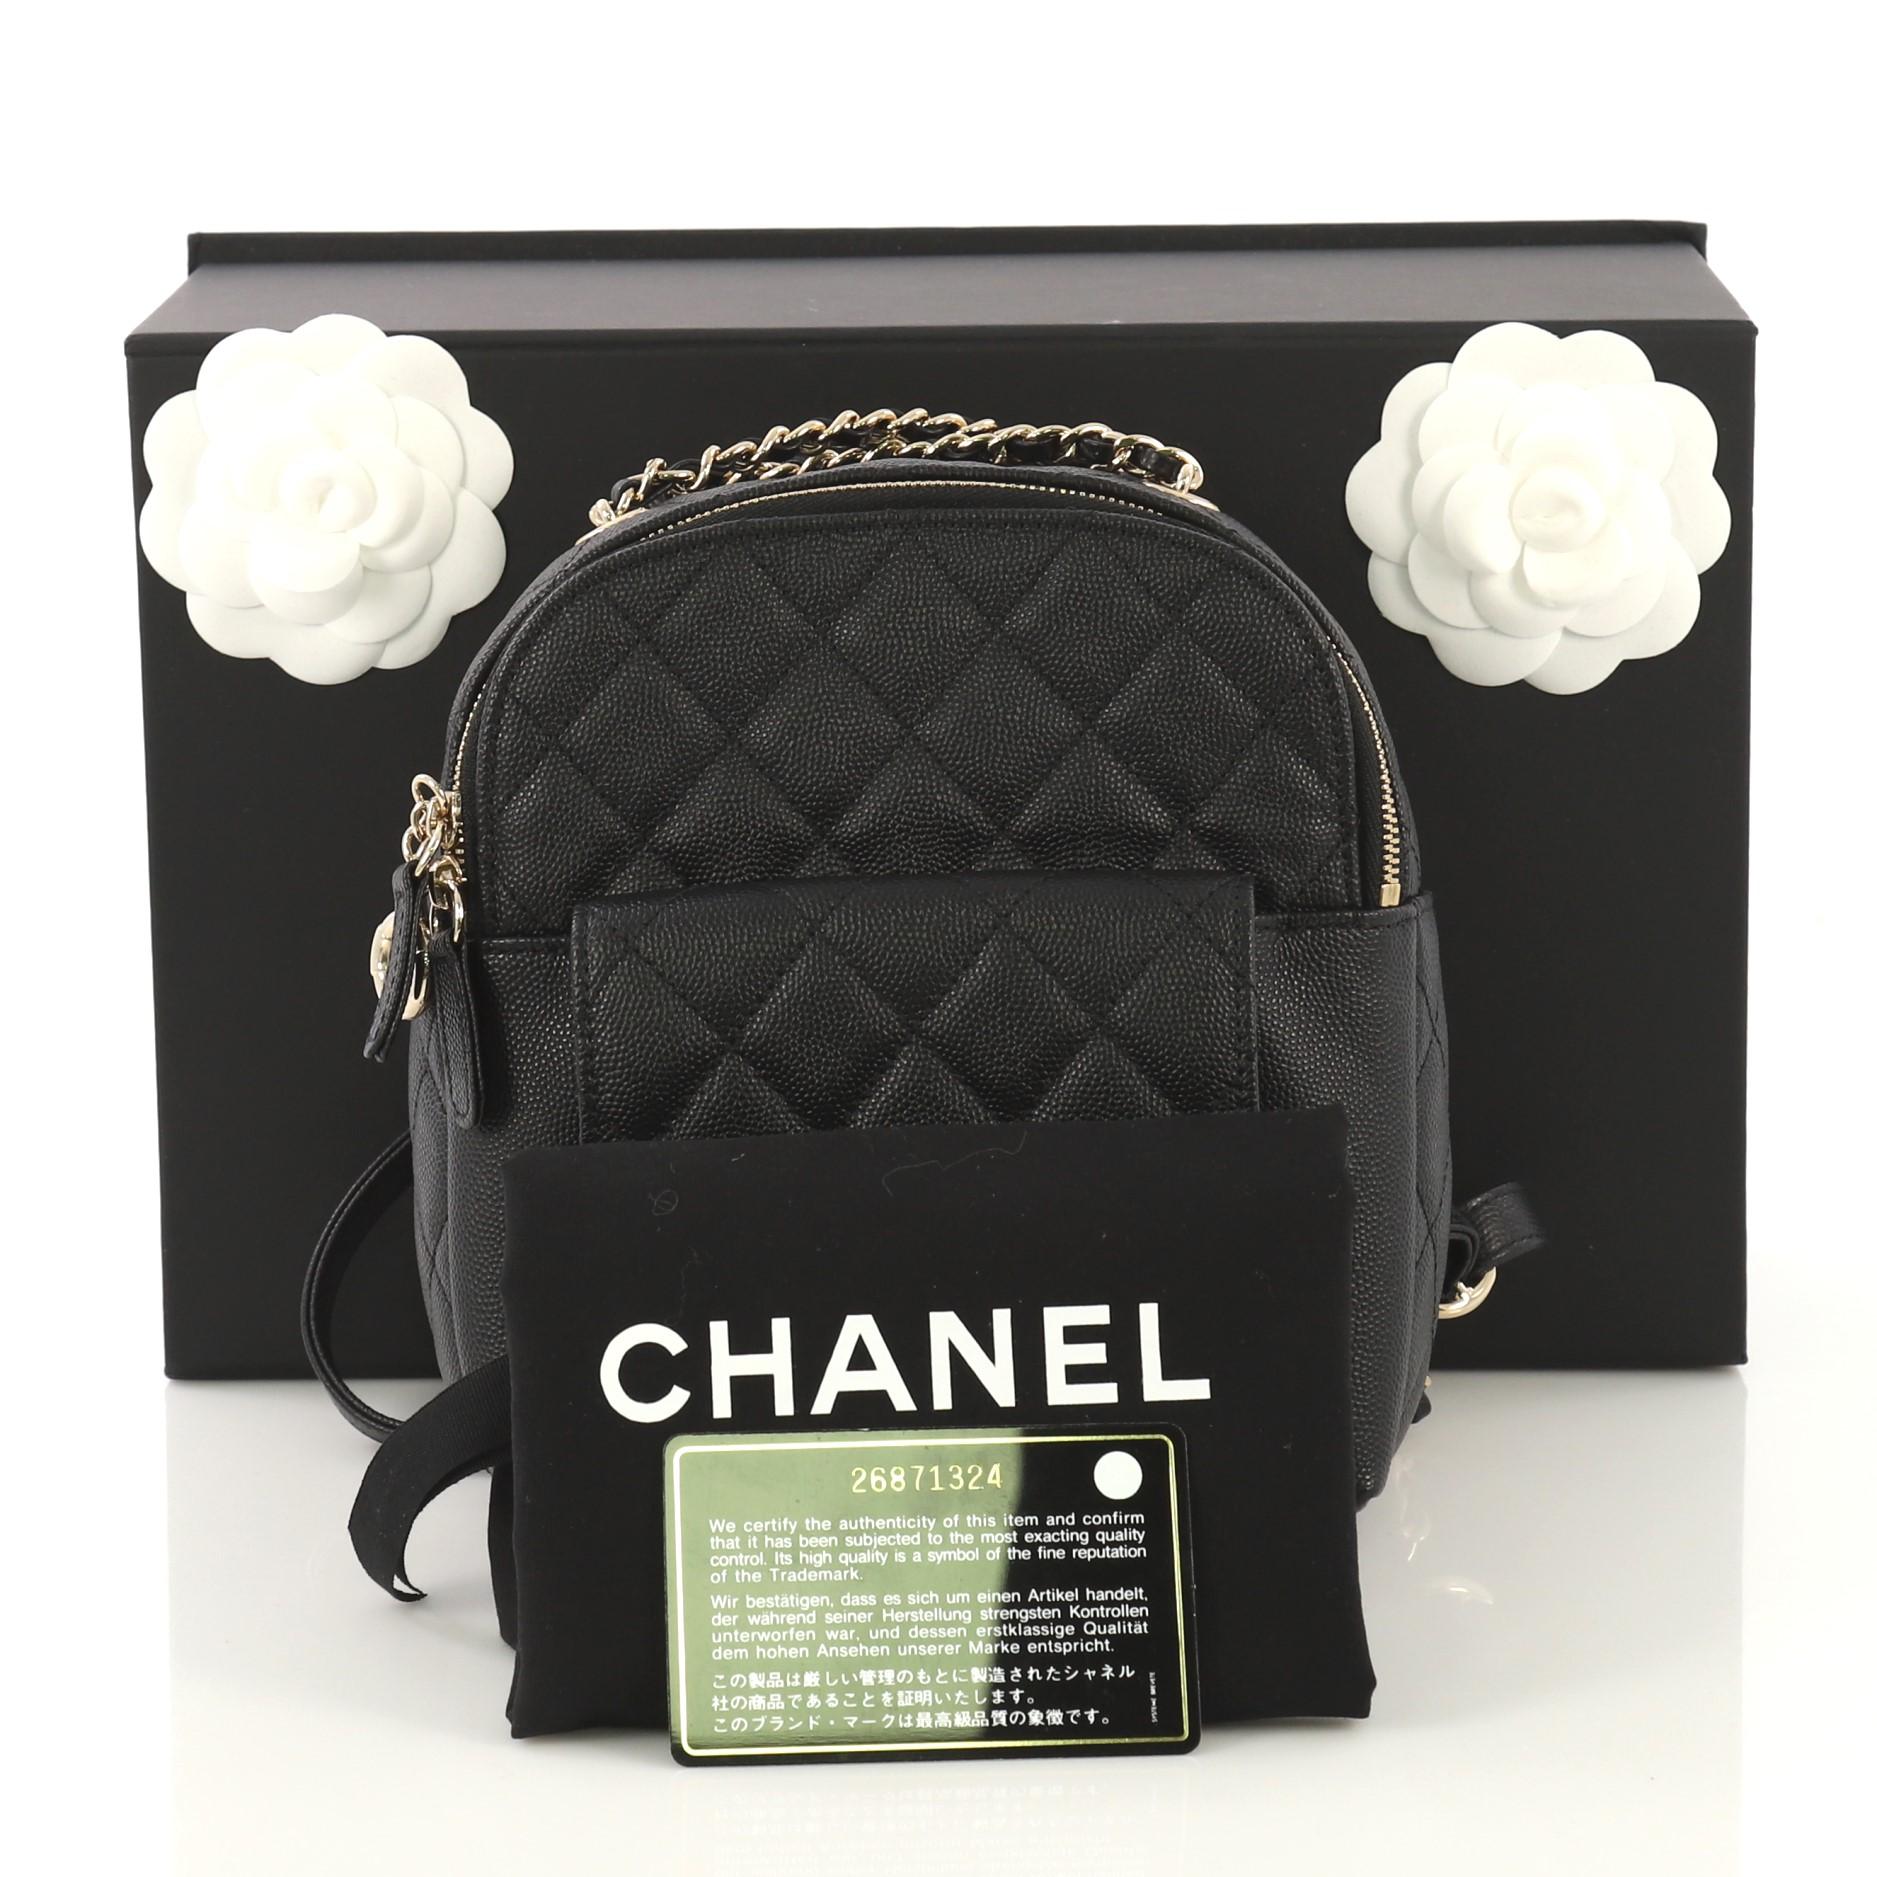 This Chanel CC Day Backpack Quilted Caviar Mini, crafted from black quilted caviar, features front flap pocket with CC turn-lock closure, adjustable backpack straps, and gold-tone hardware. Its zip closure opens to a black fabric interior with slip